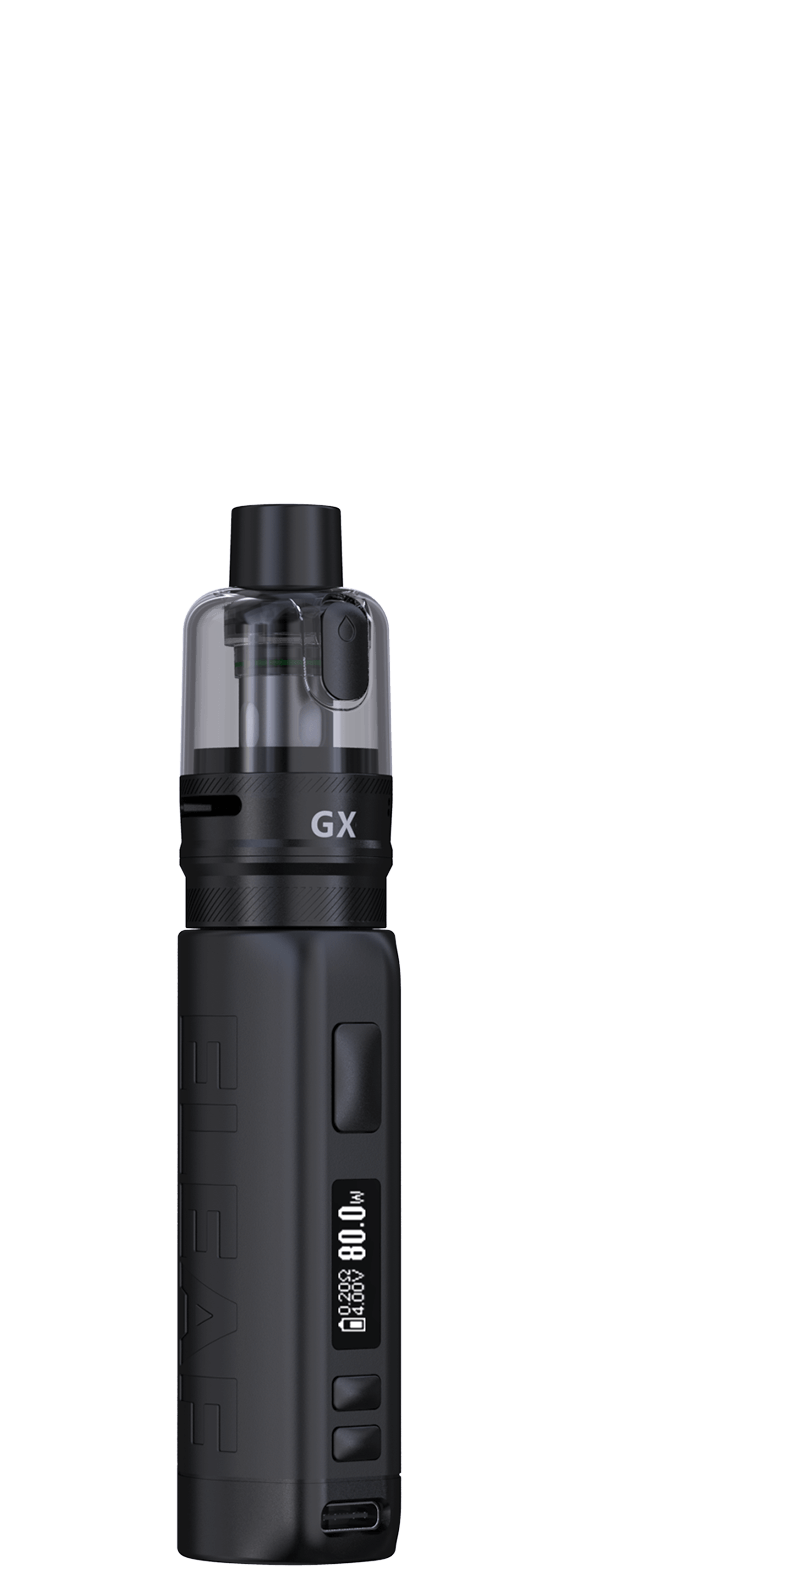 iSOLO S with GX Tank